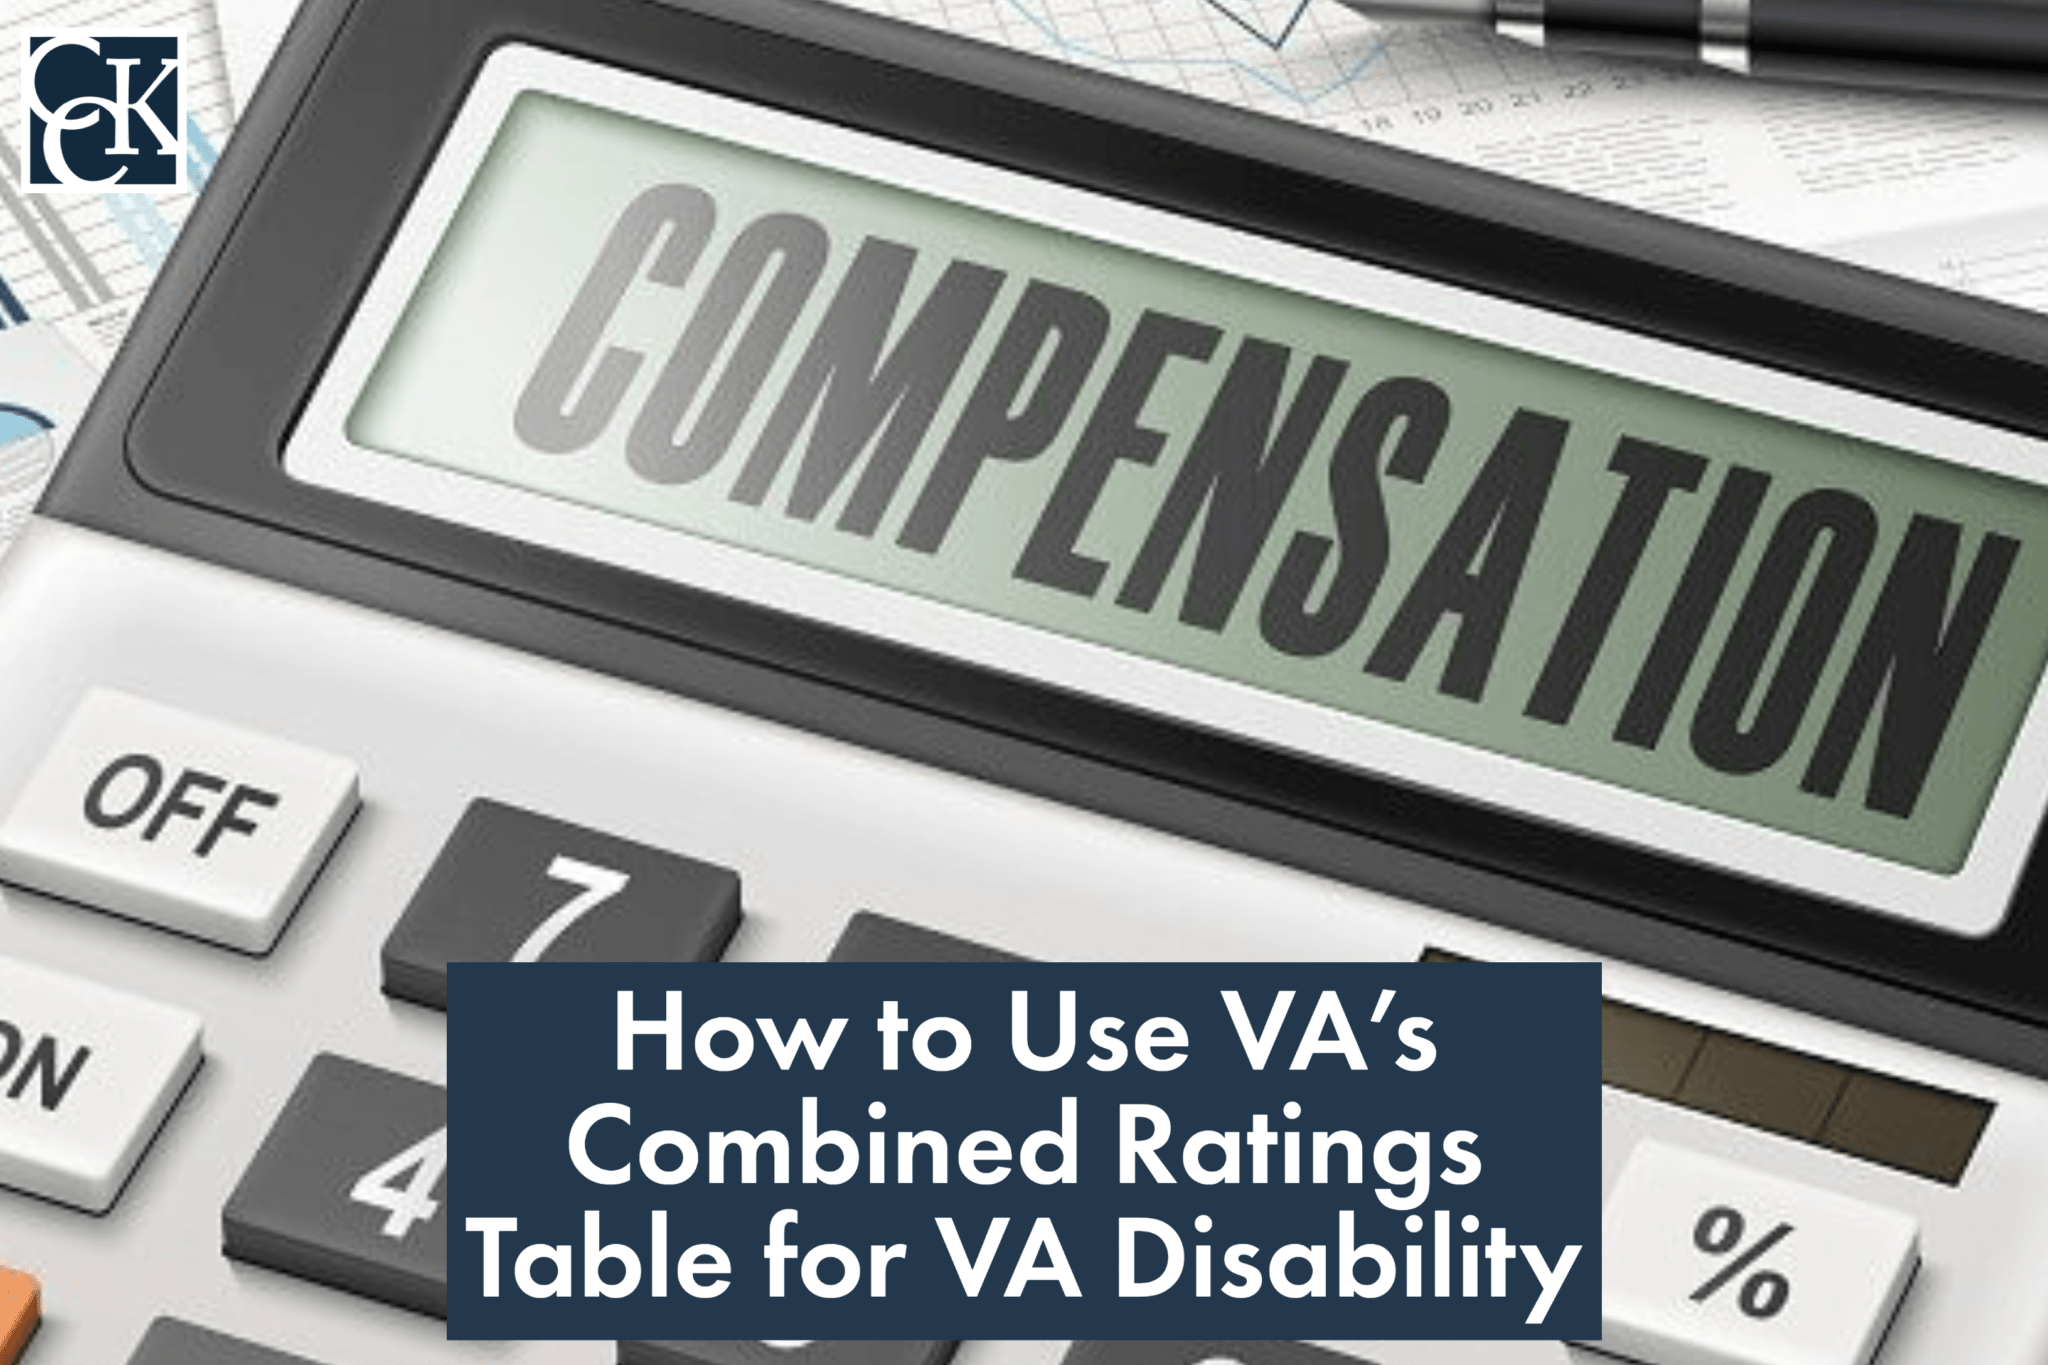 How to Use VA's Combined Ratings Table CCK Law